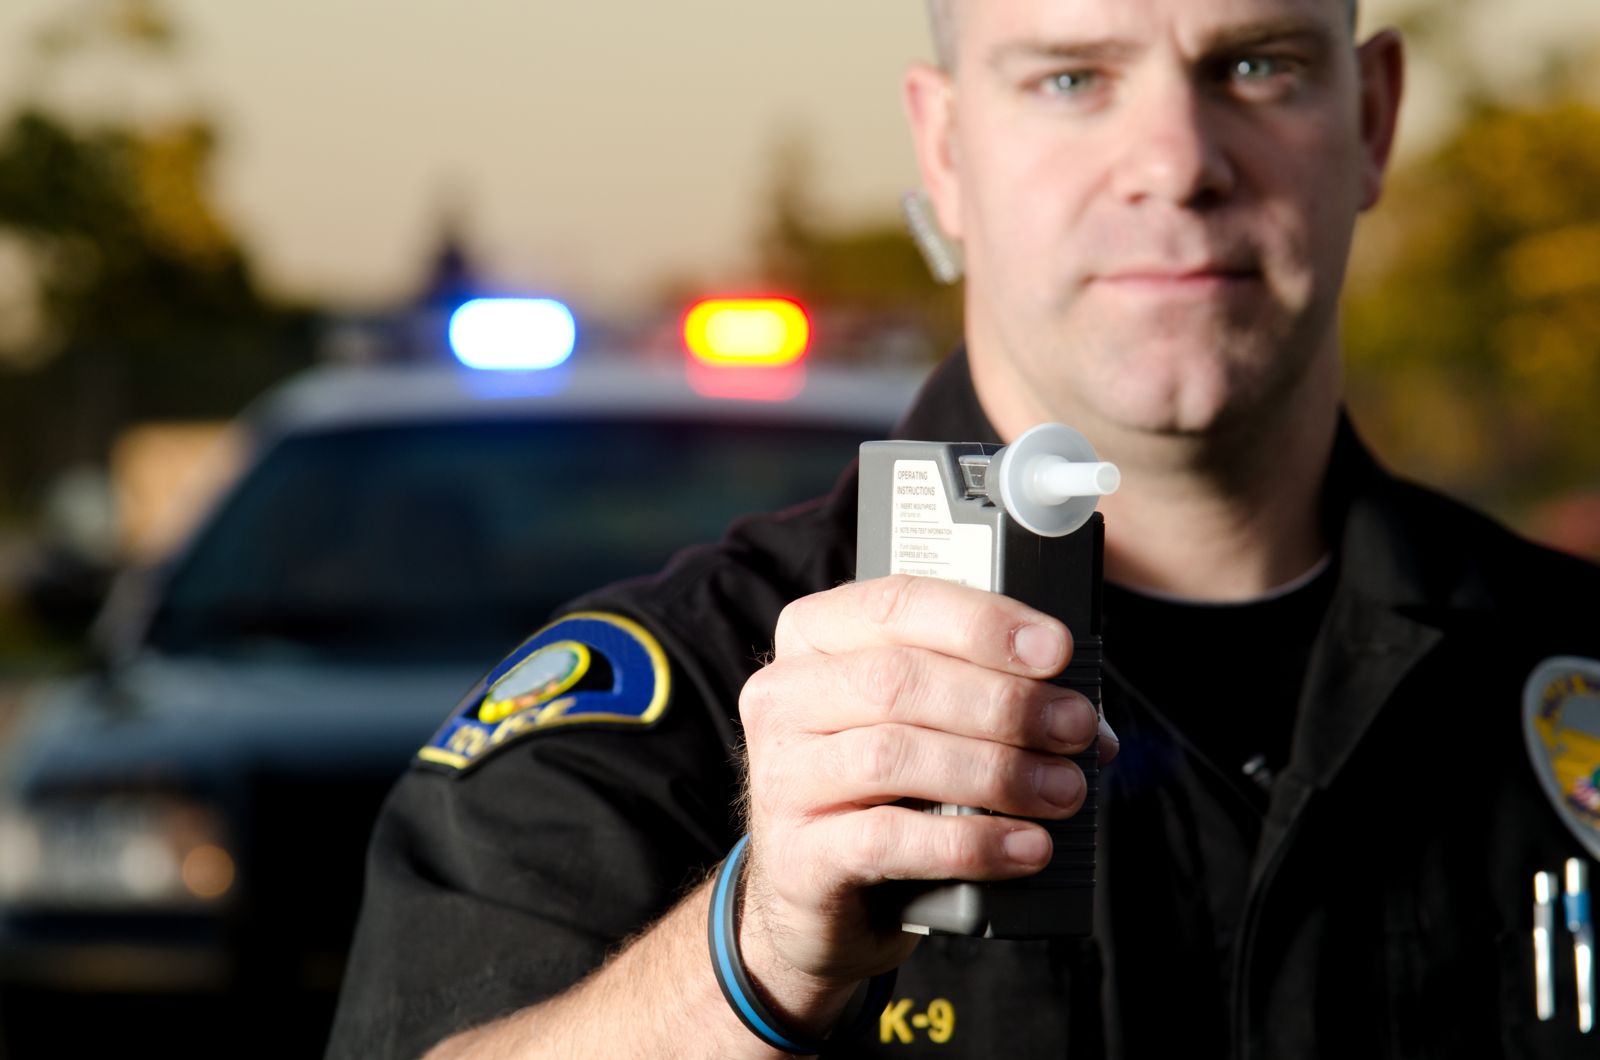 If I’m pulled over for DUI in South Florida, do I have to give a breath test or breathalyzer?: DUI Attorney Shares